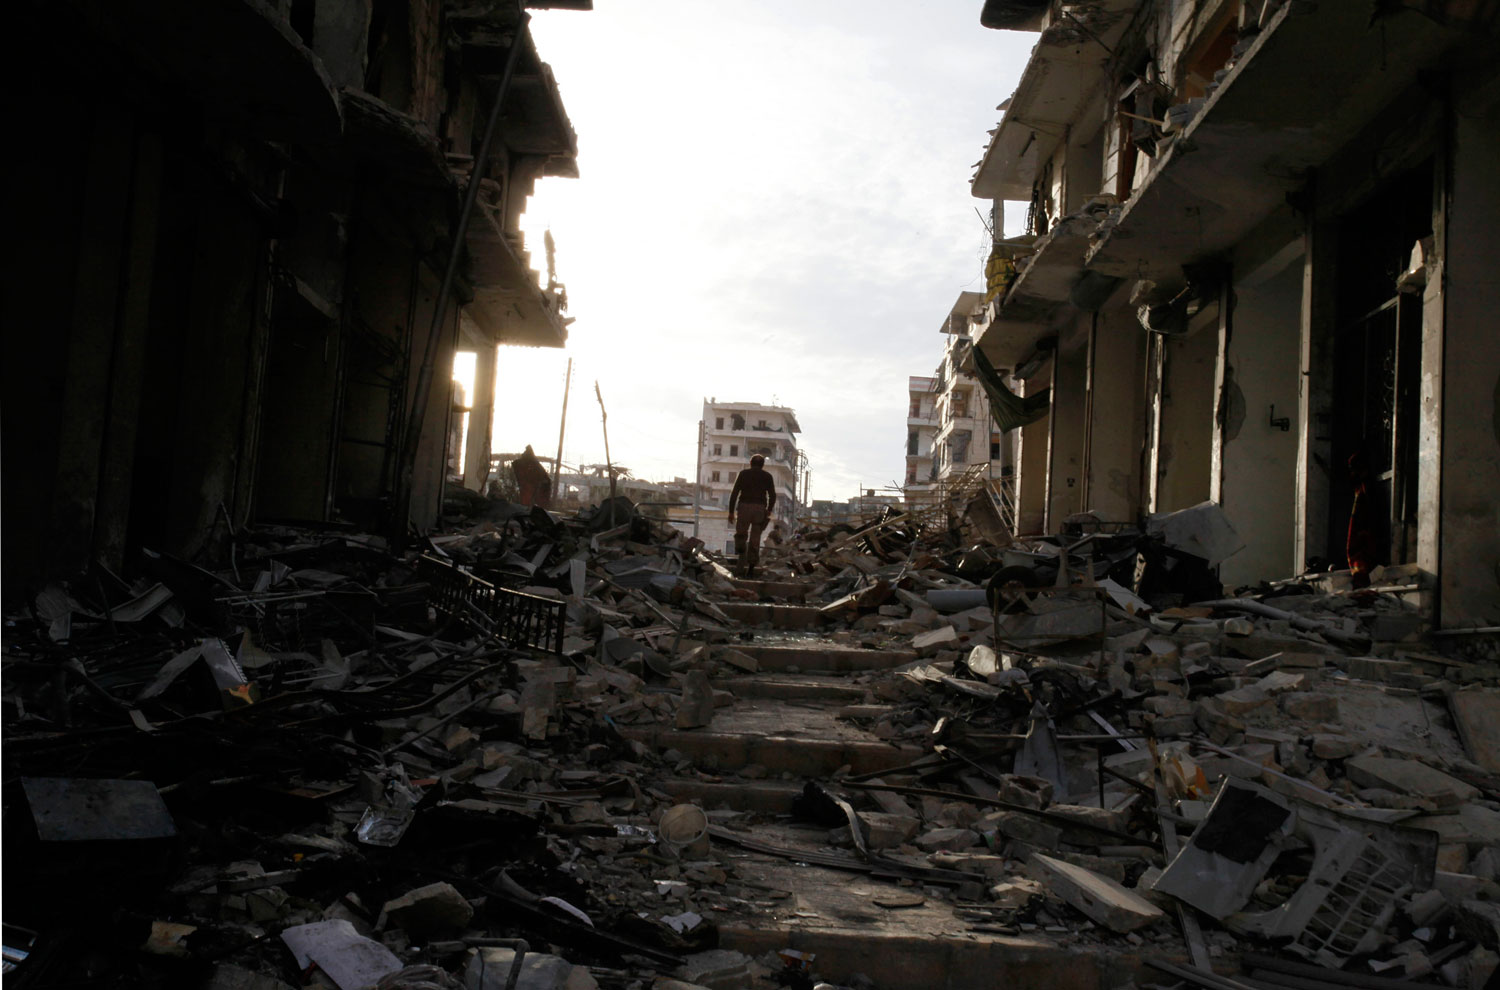 A Free Syrian Army fighter walks up a set of stairs among damage and debris in Aleppo, on Dec. 1, 2013.